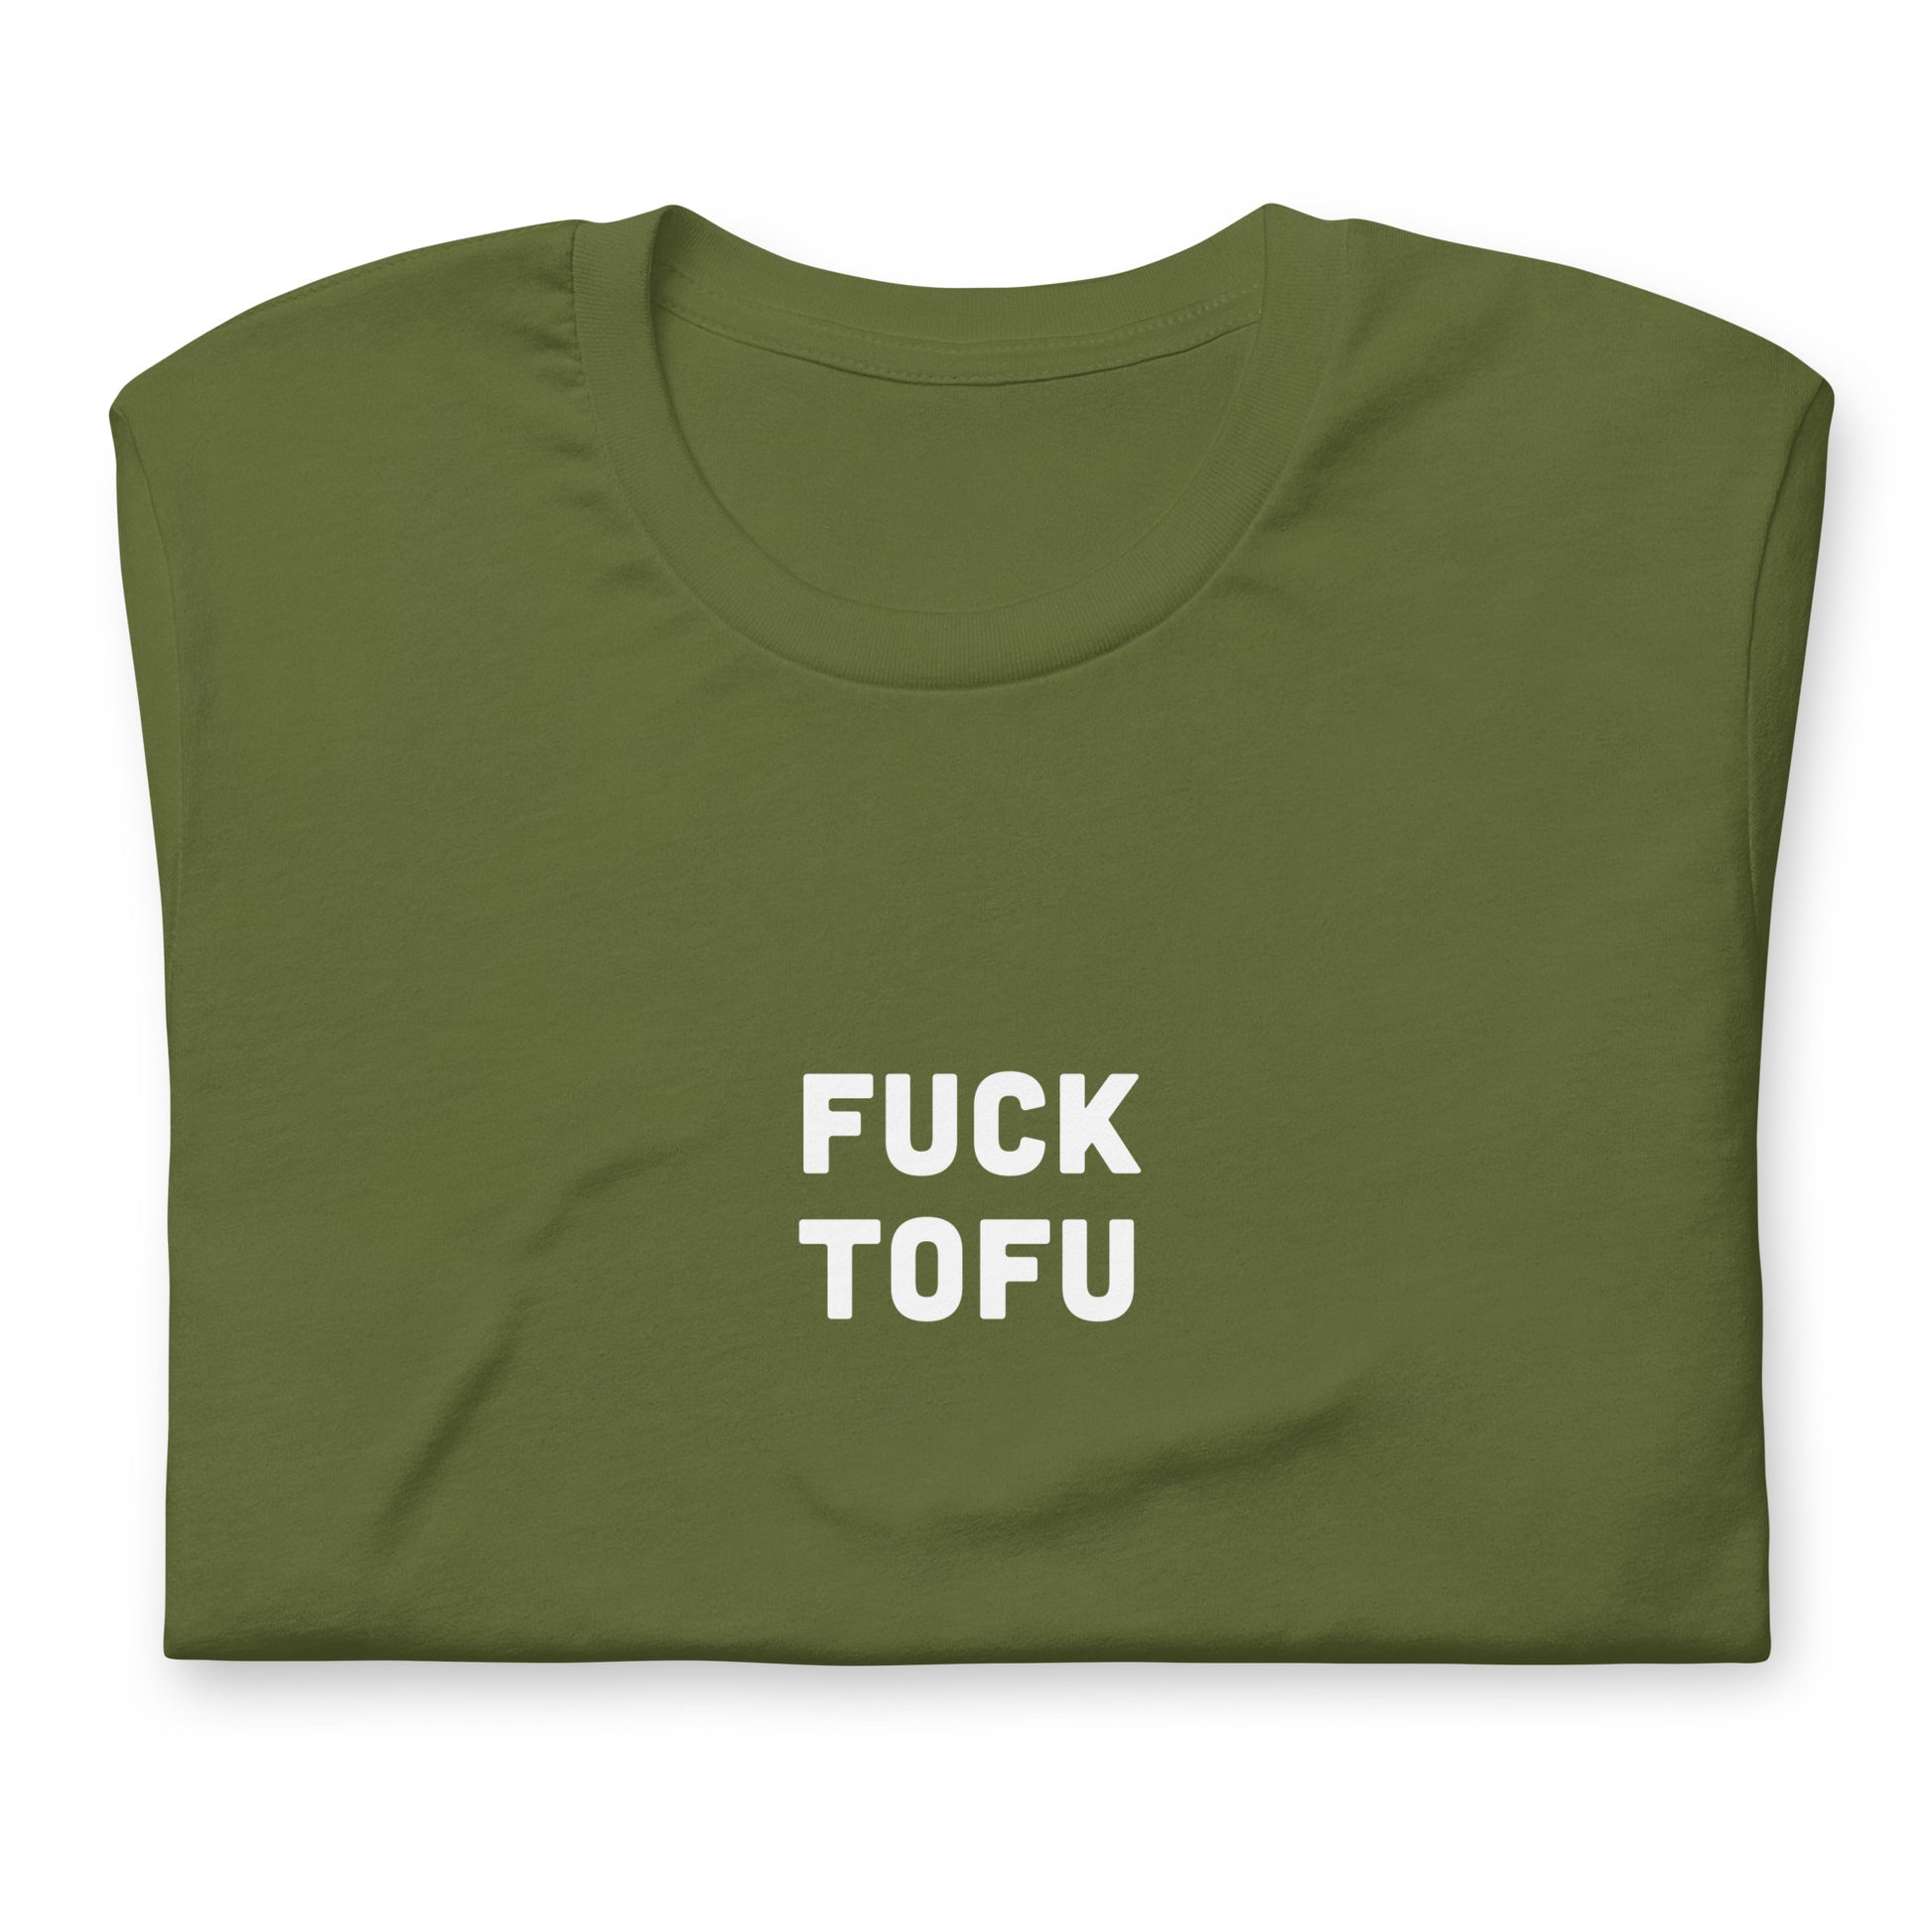 Fuck Tofu T-Shirt Size S Color Navy